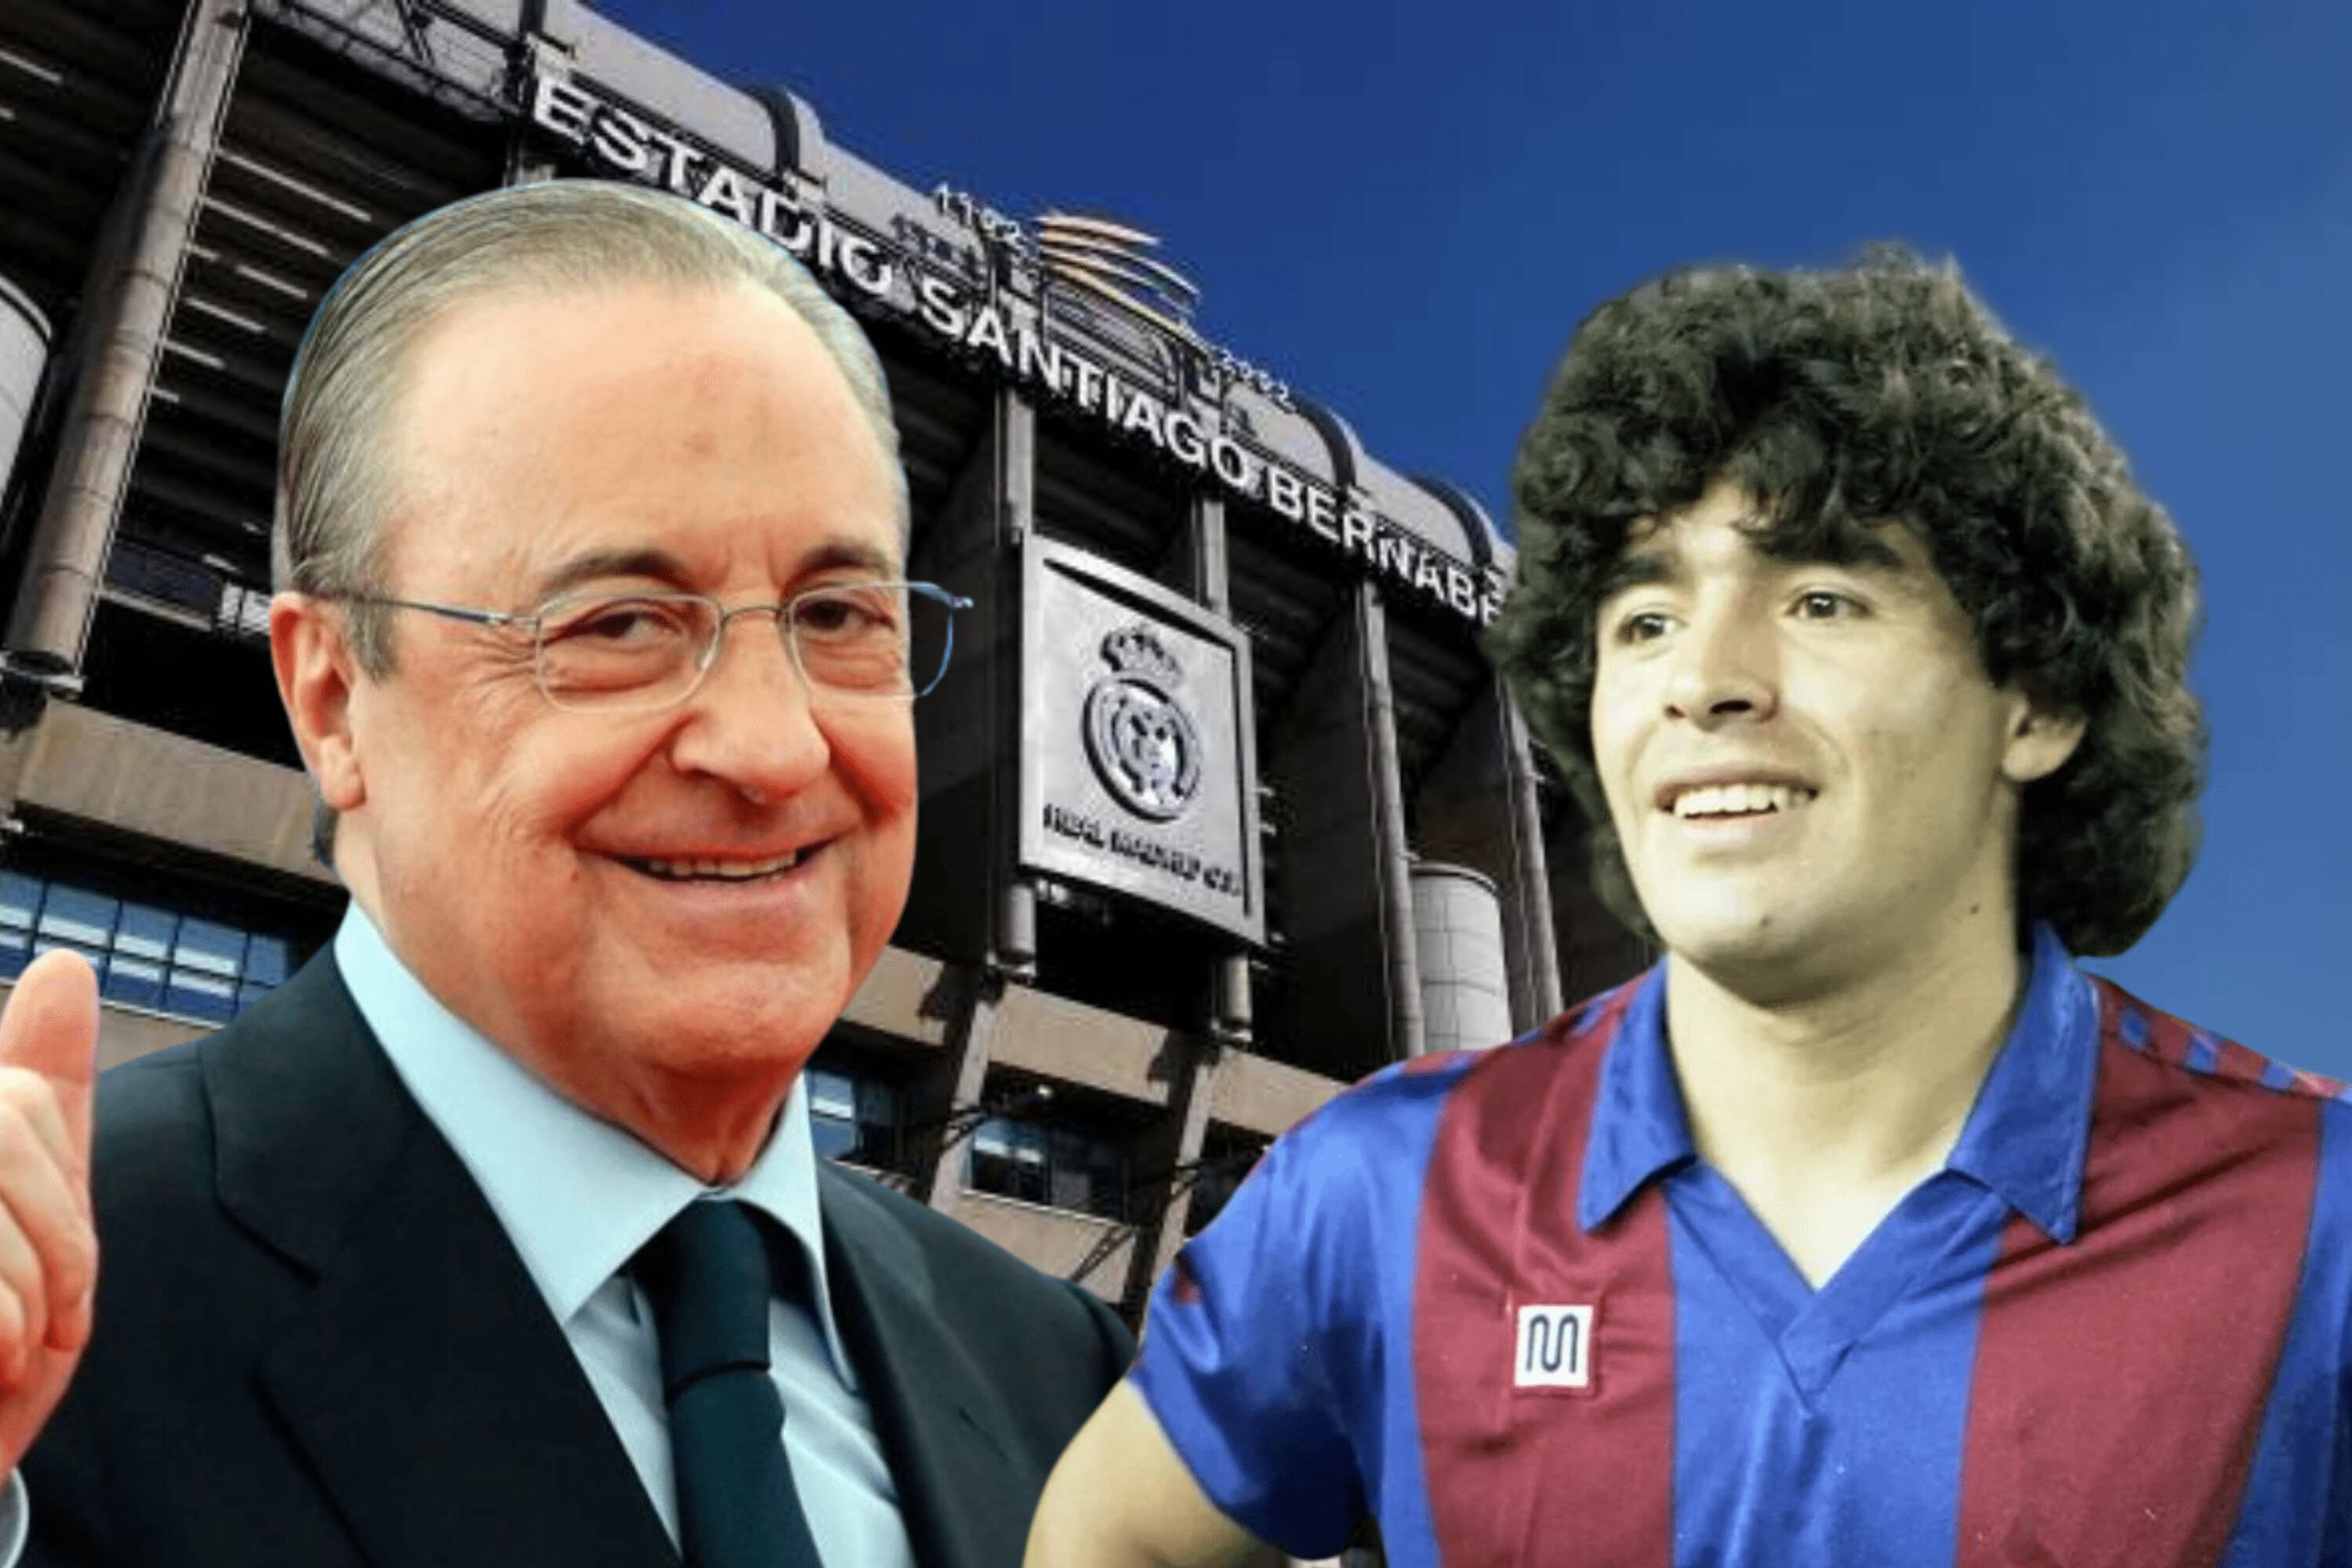 Real Madrid wanted the new Maradona, now they receive the worst news in the middle of the holidays